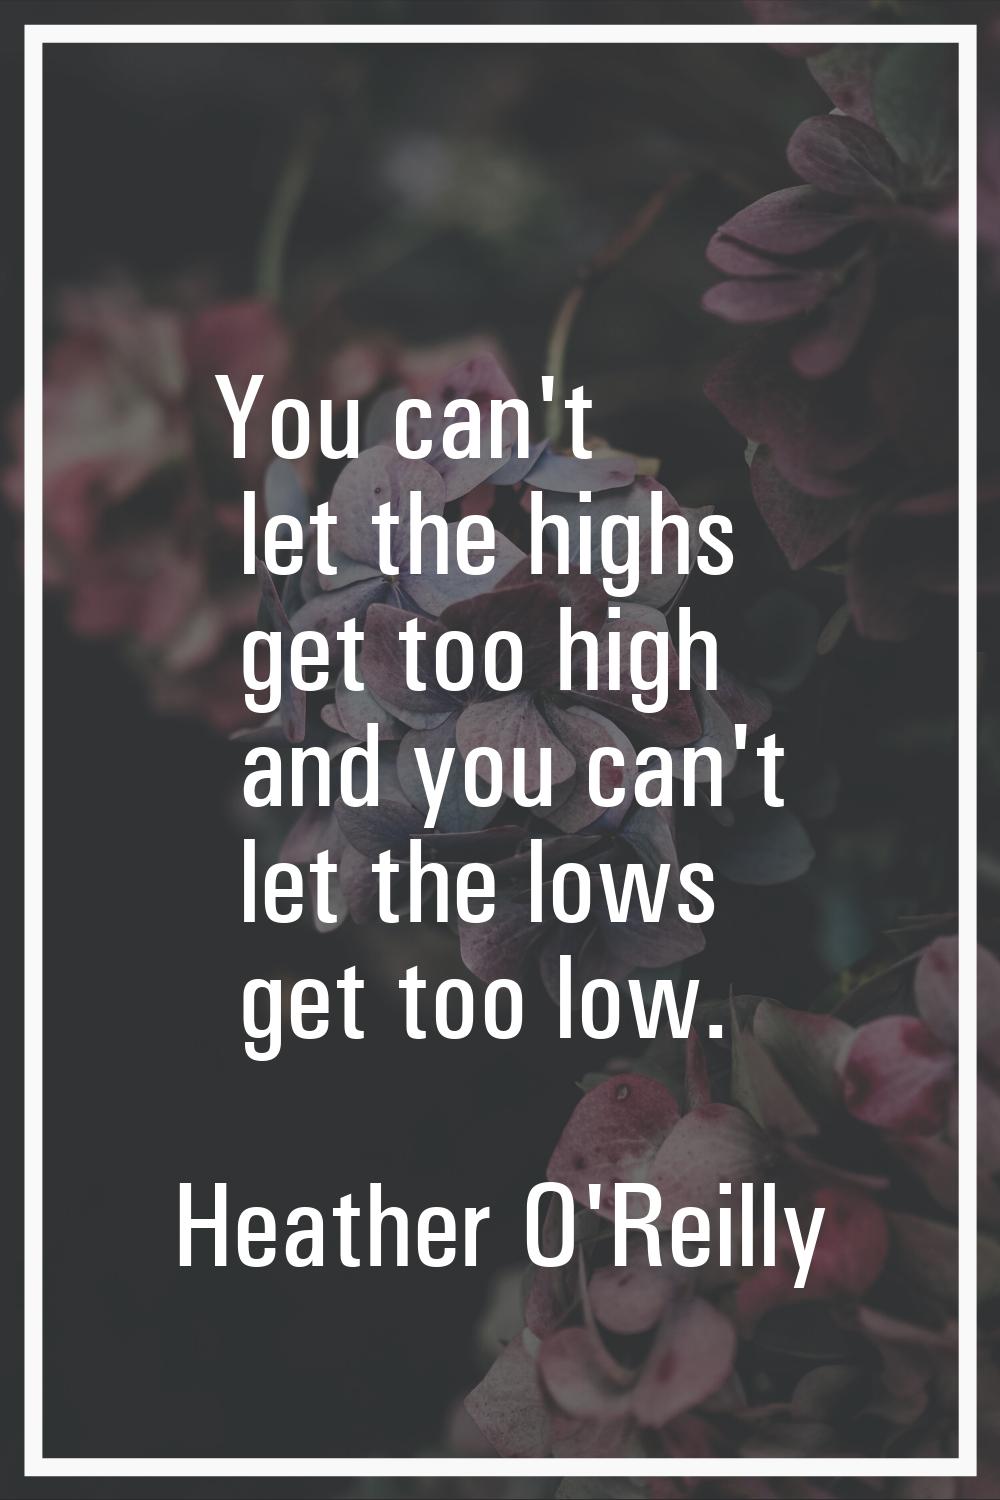 You can't let the highs get too high and you can't let the lows get too low.